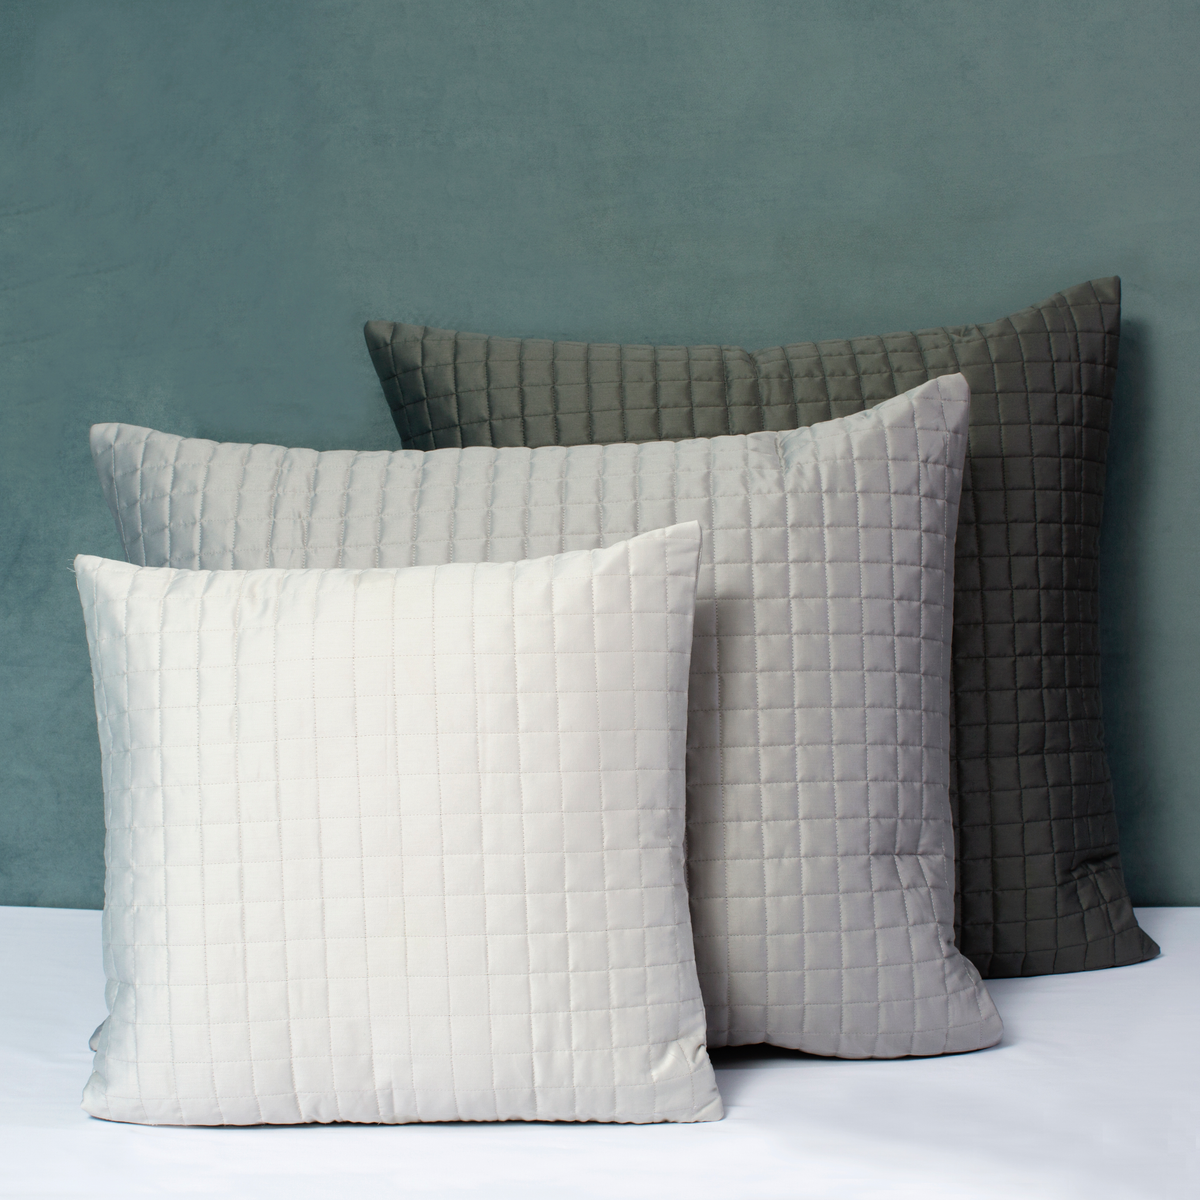 Quilted Shams of Signoria Masaccio Bedding in Different Colors